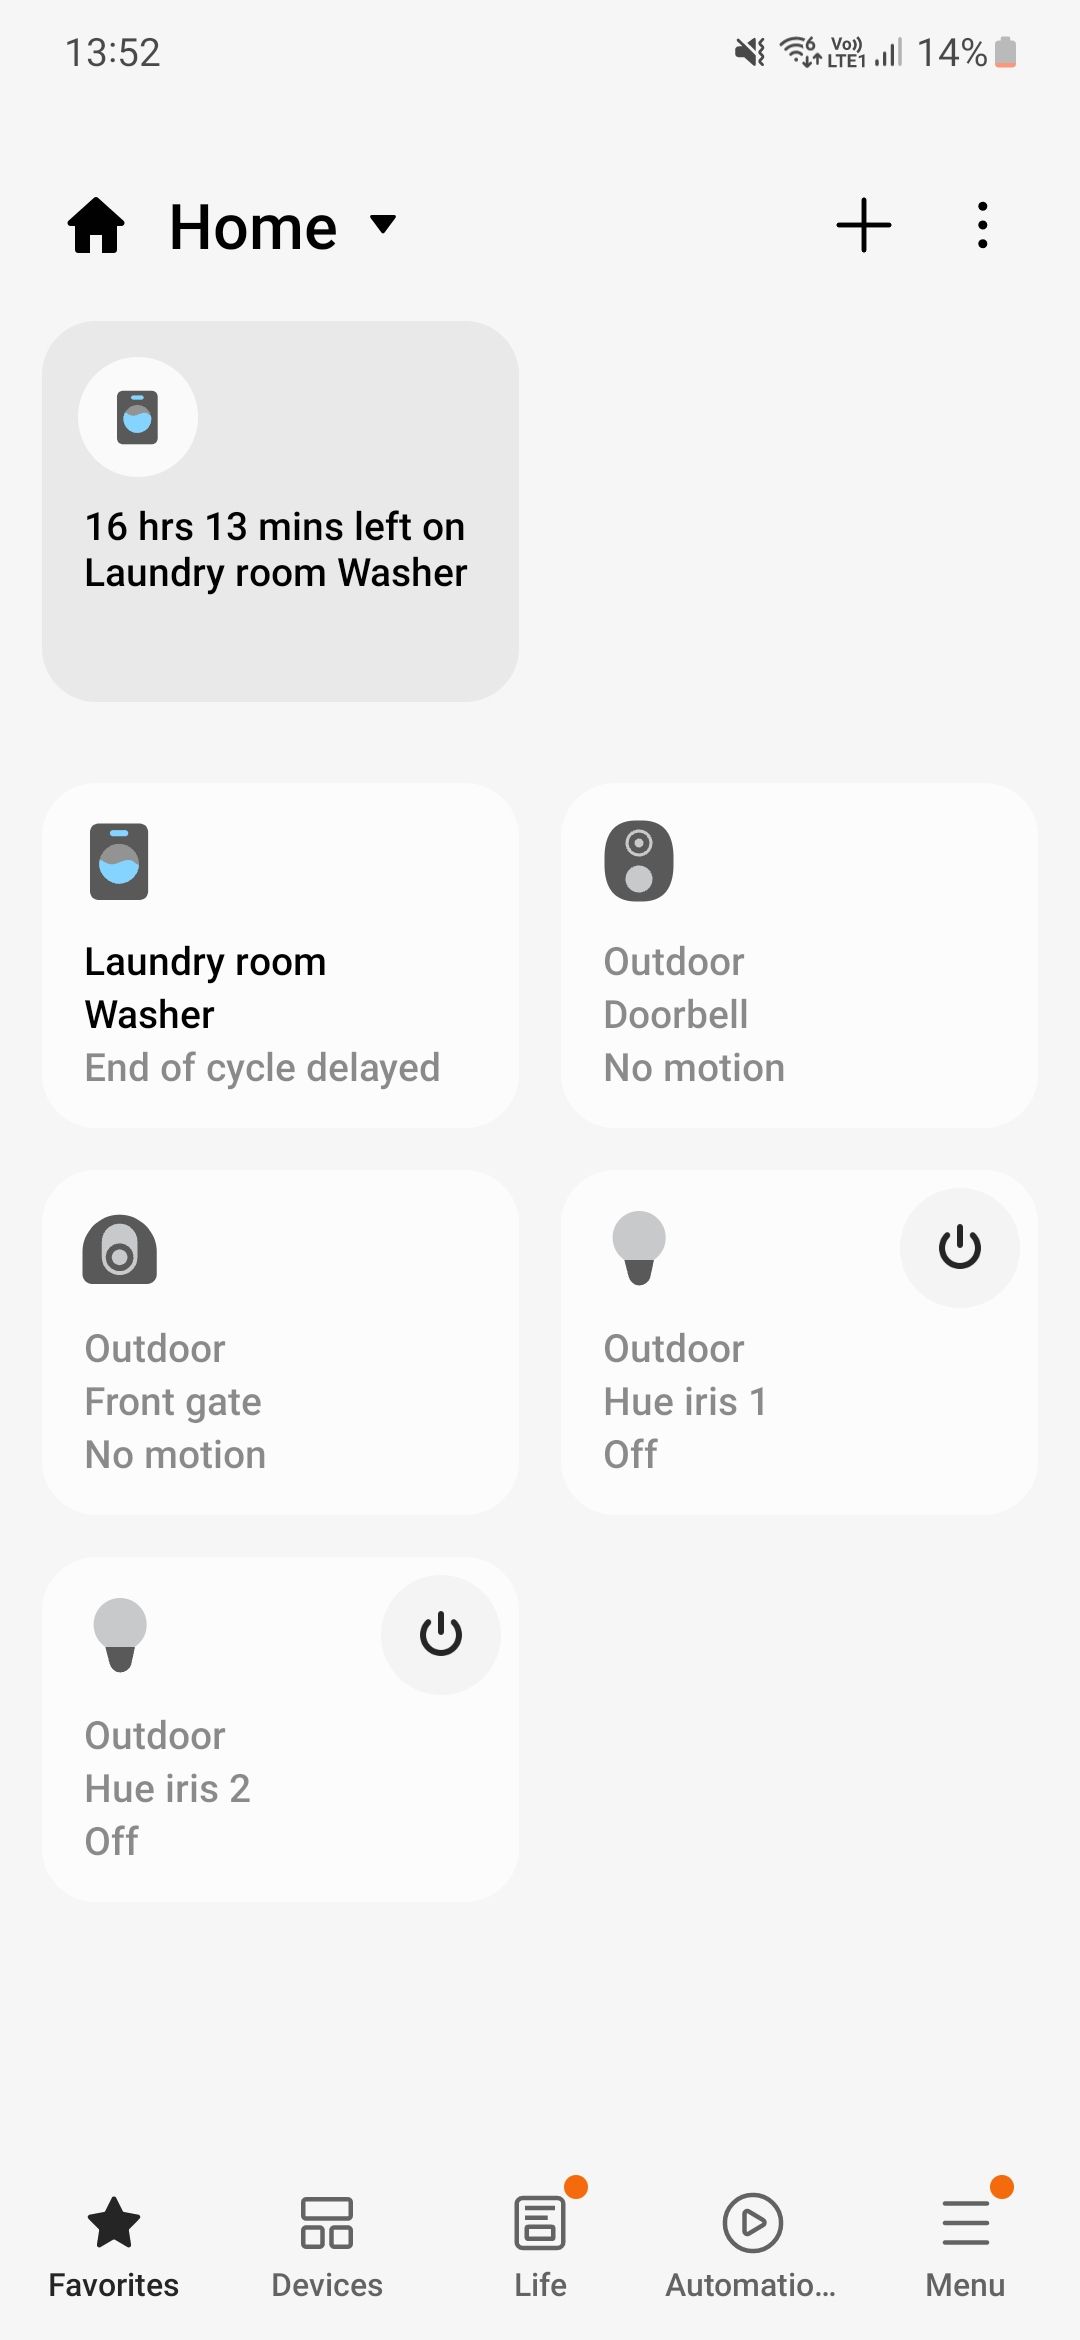 A screenshot showing the favorite devices in SmartThings